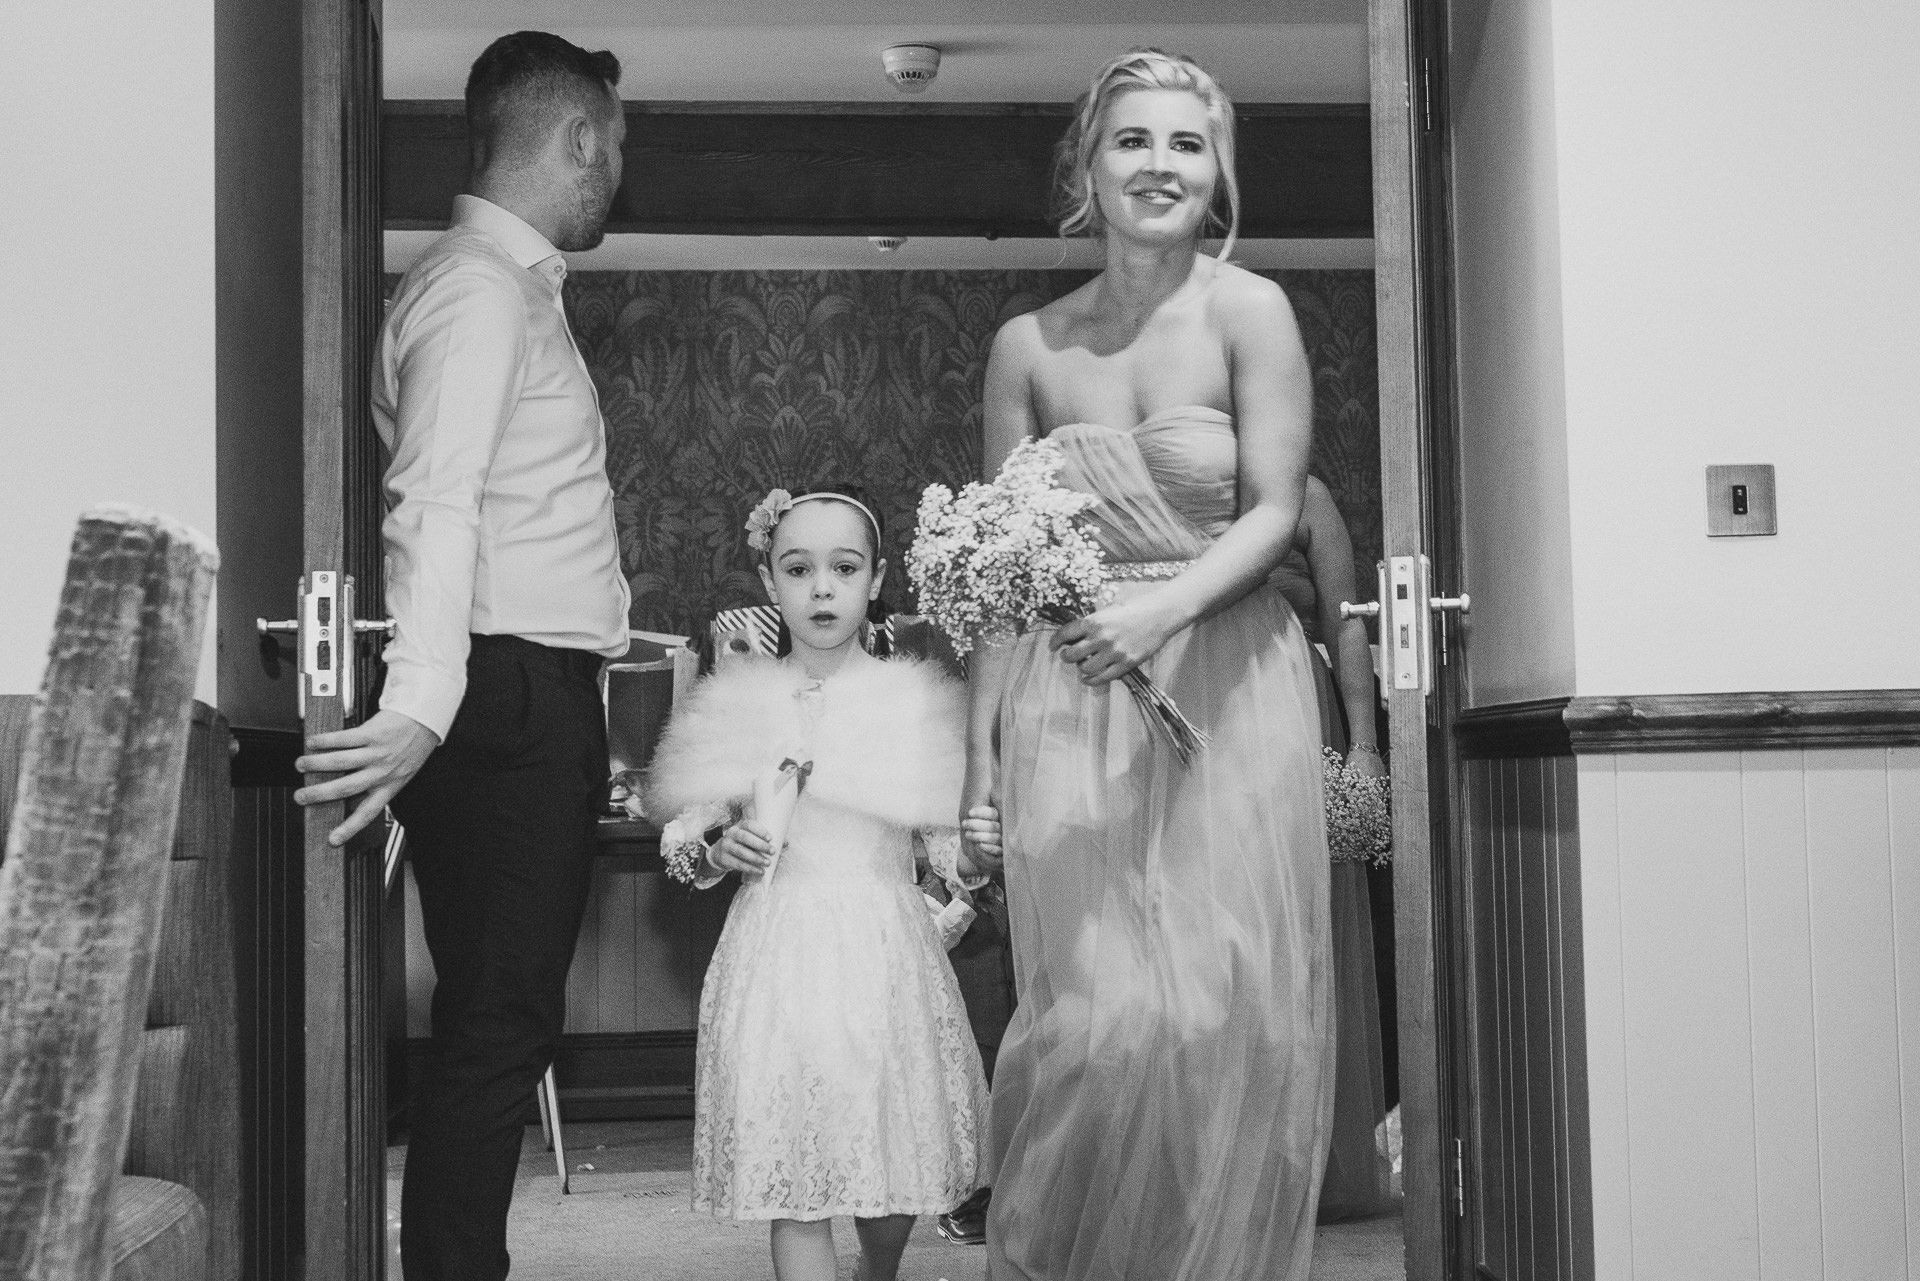 flowergirl looks nervous as she is about to walk down the aisle with a bridesmaid